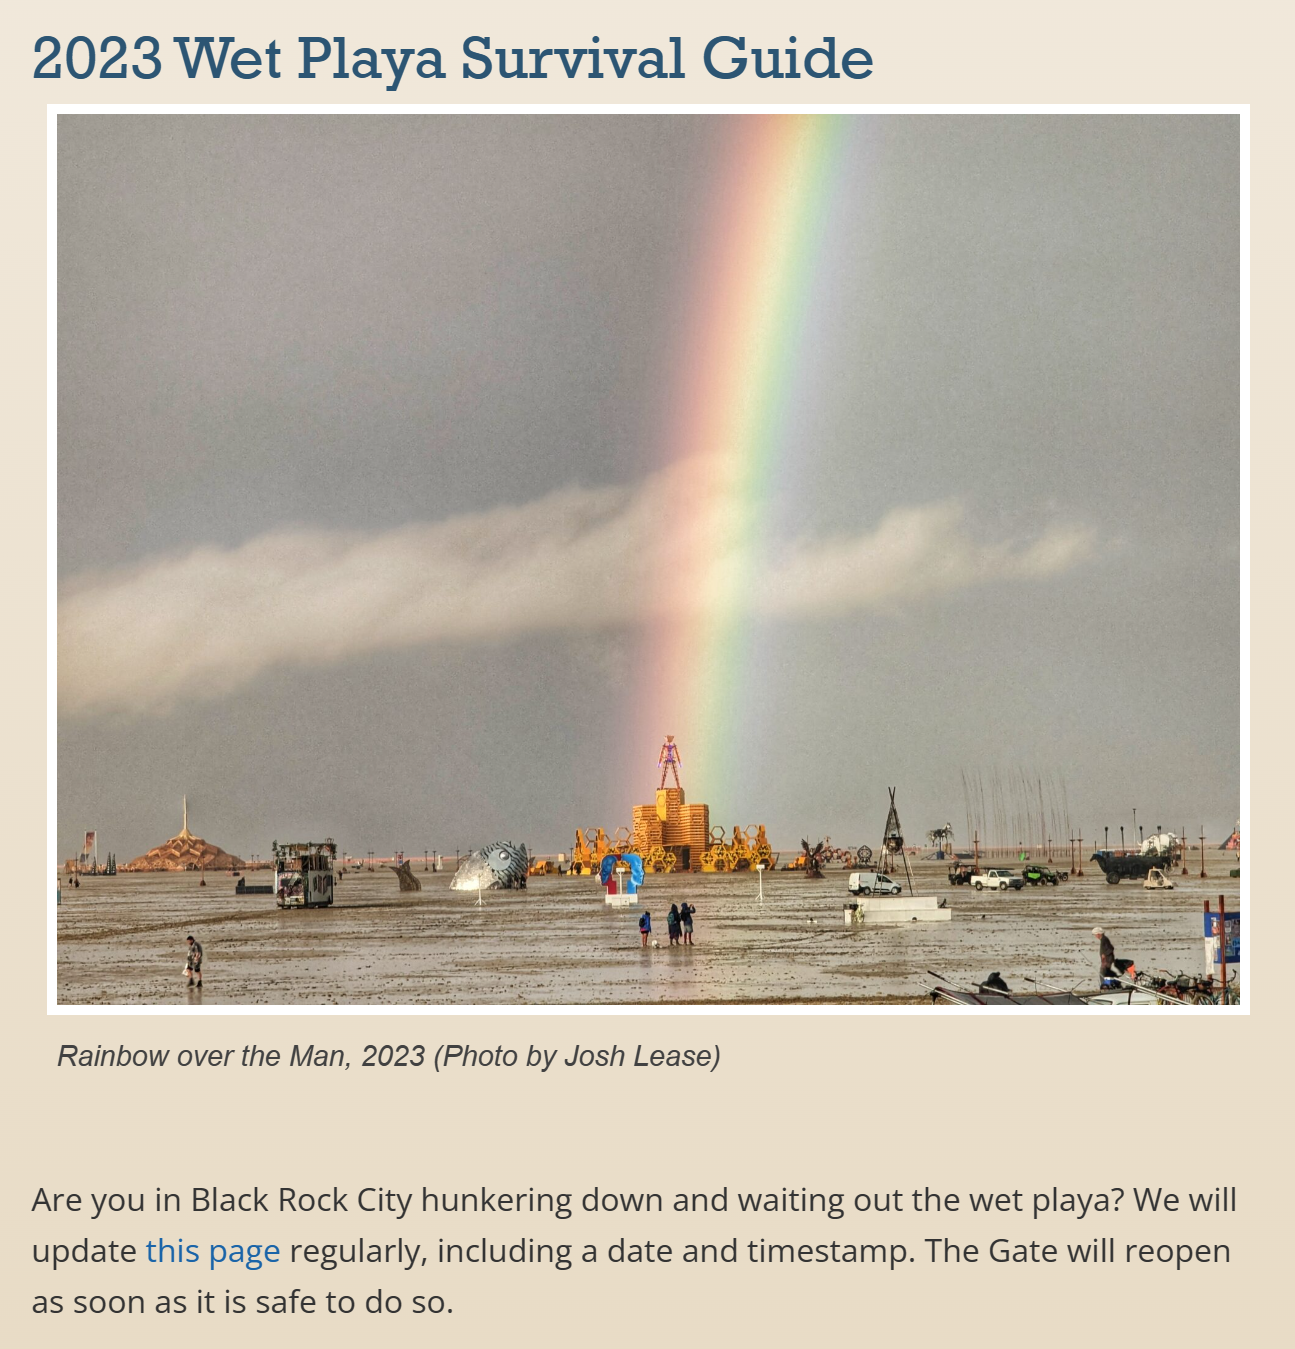 Screenshot of the “2023 Wet Playa Survival Guide” web page by organizers of the Burning Man festival, 3 September 2023. The vent was shut down due to heavy reanfall and flooding, leaving one dead and thousands stranded in the desert mud. Photo: “Rainbow over the Man, 2023” by Josh Lease Graphic: Burning Man